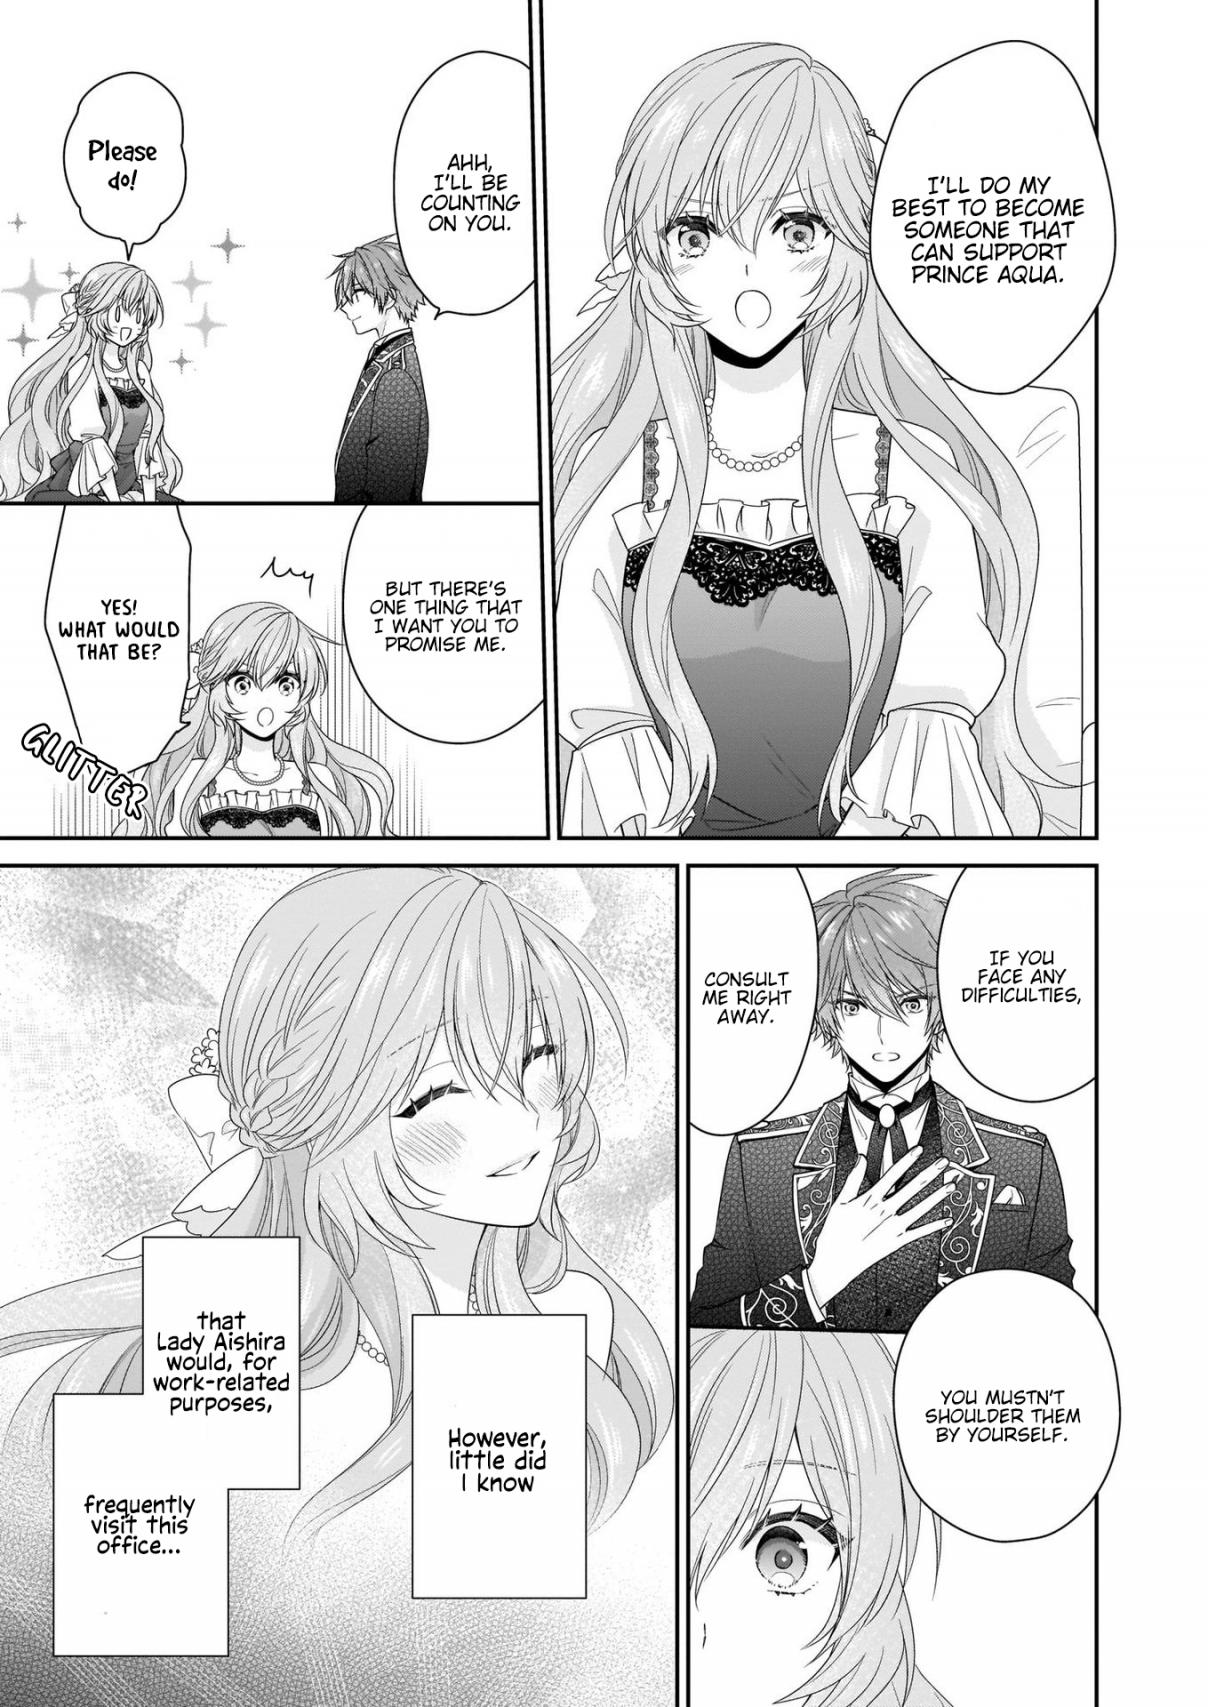 The Villainess Is Adored by the Crown Prince of the Neighboring Kingdom Vol. 5 Ch. 17